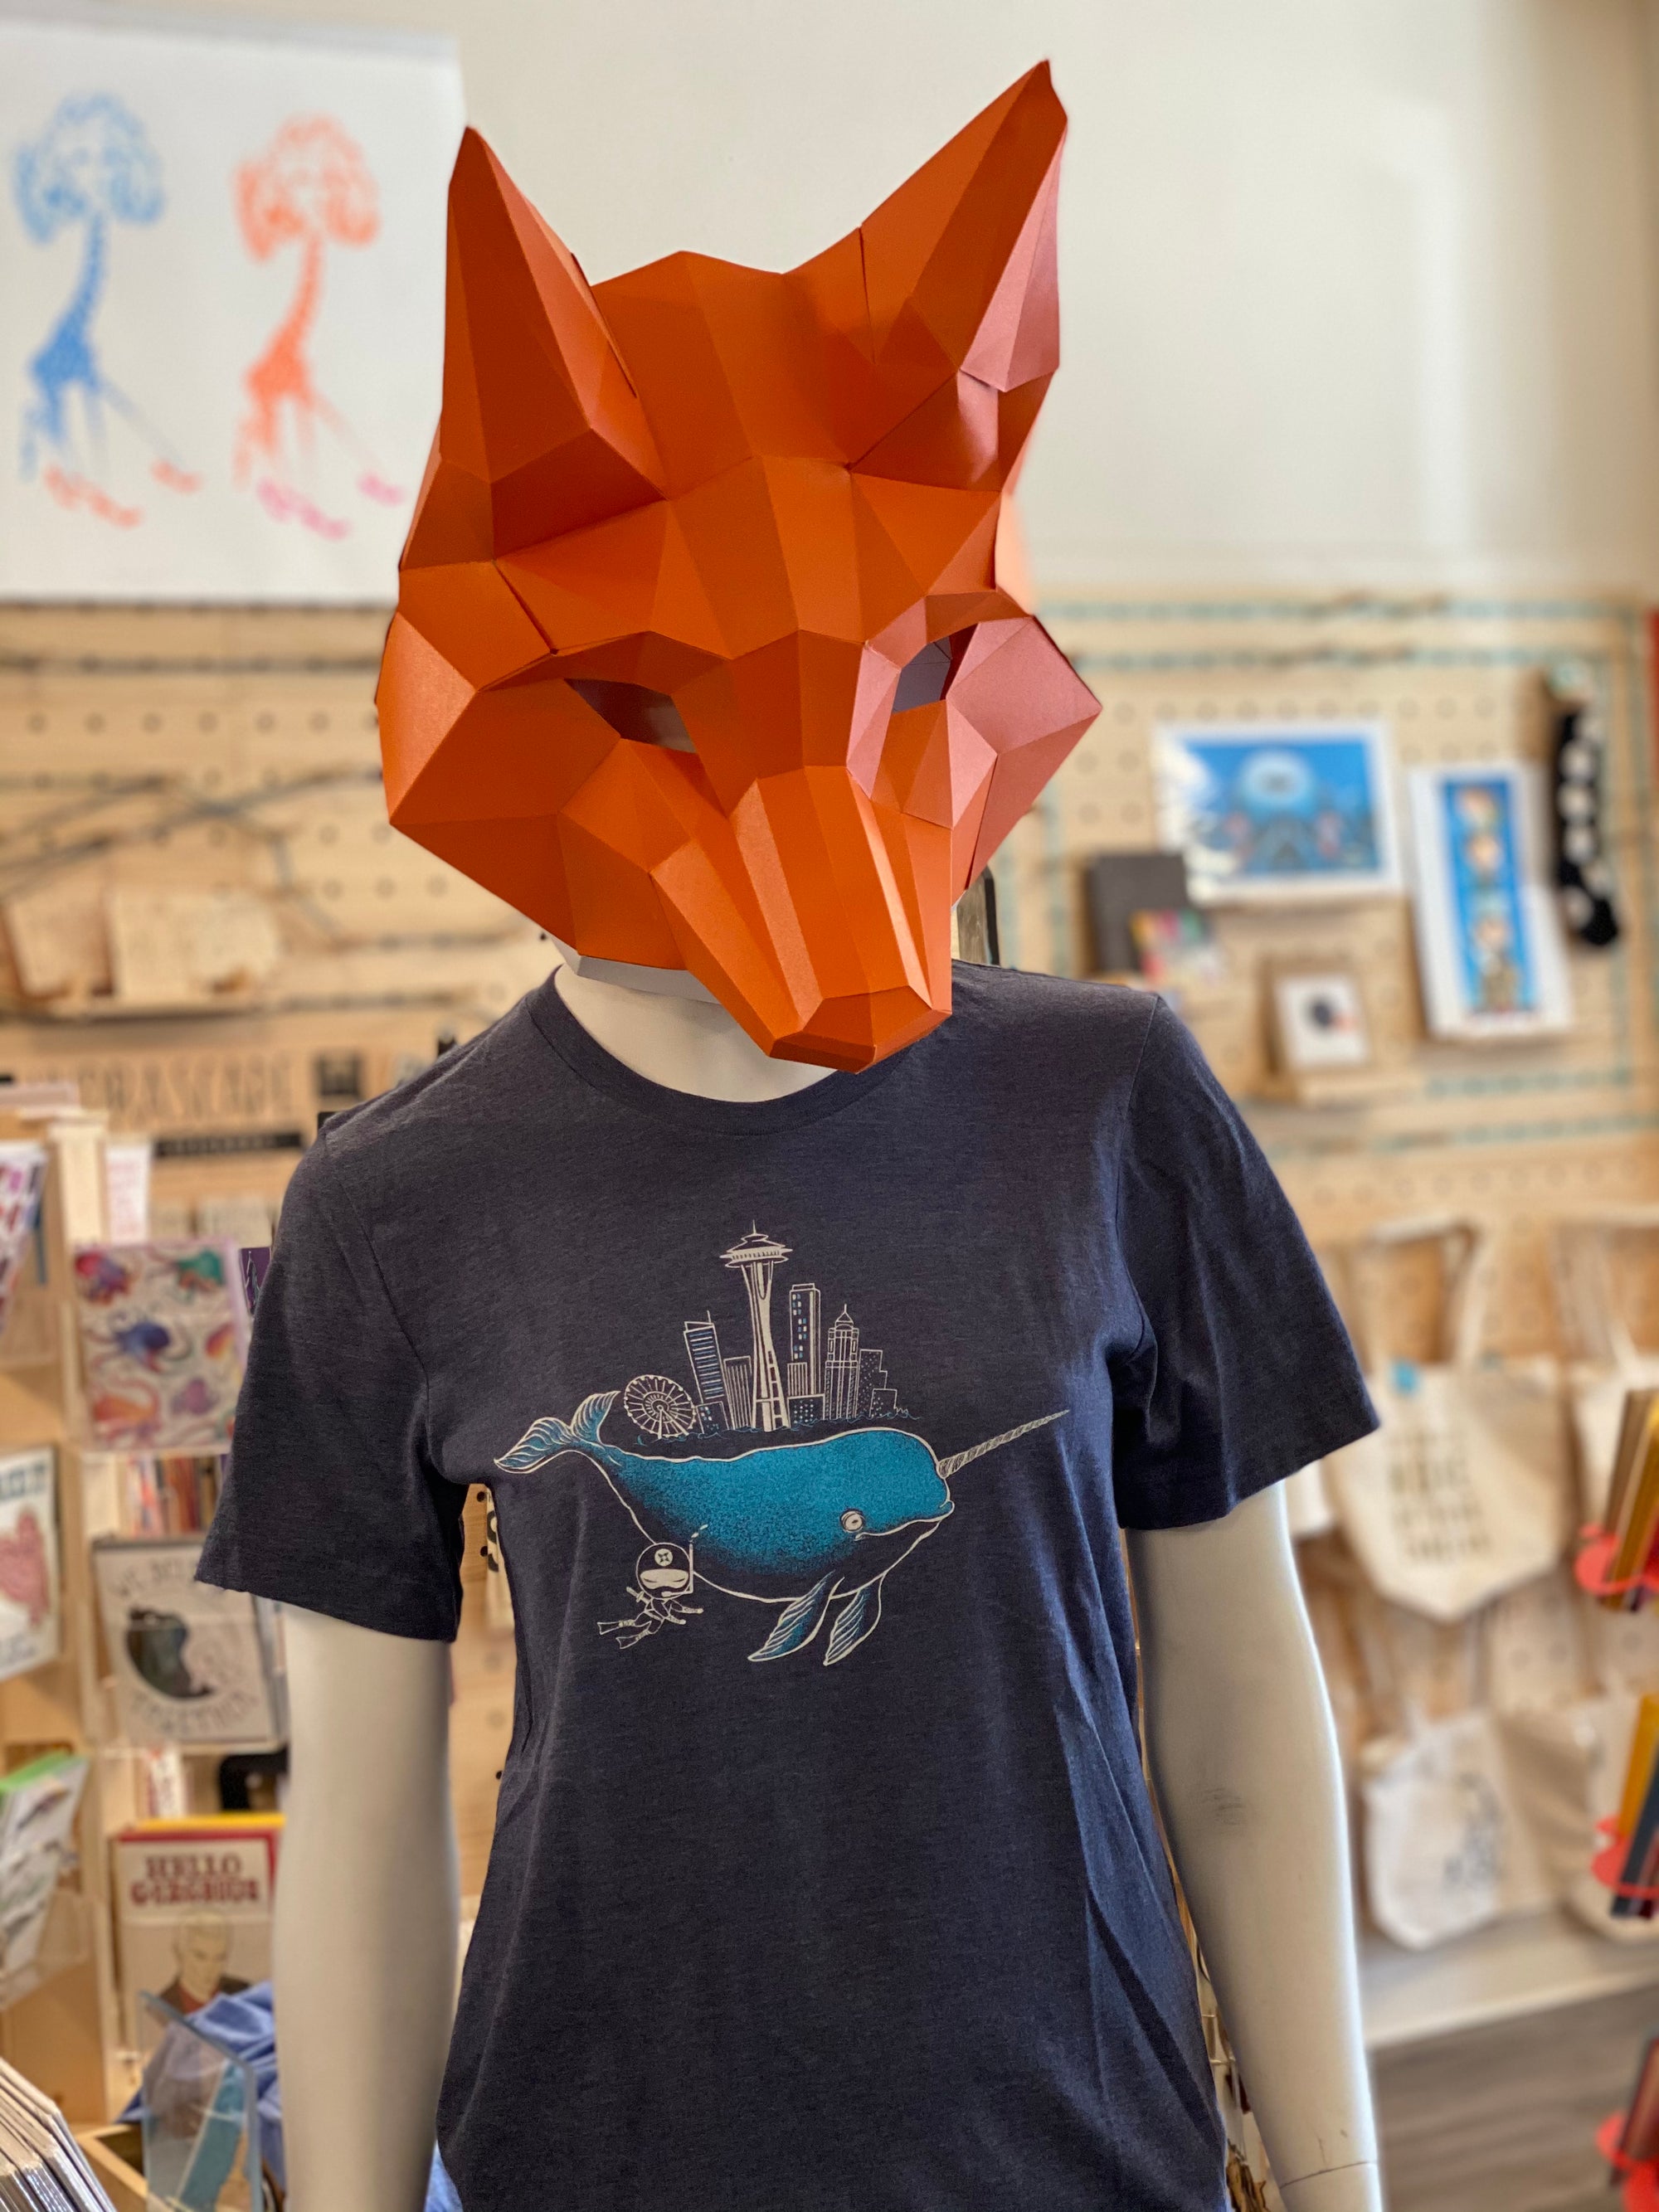 Shirt: Seattle Narwhal - Unisex Crew